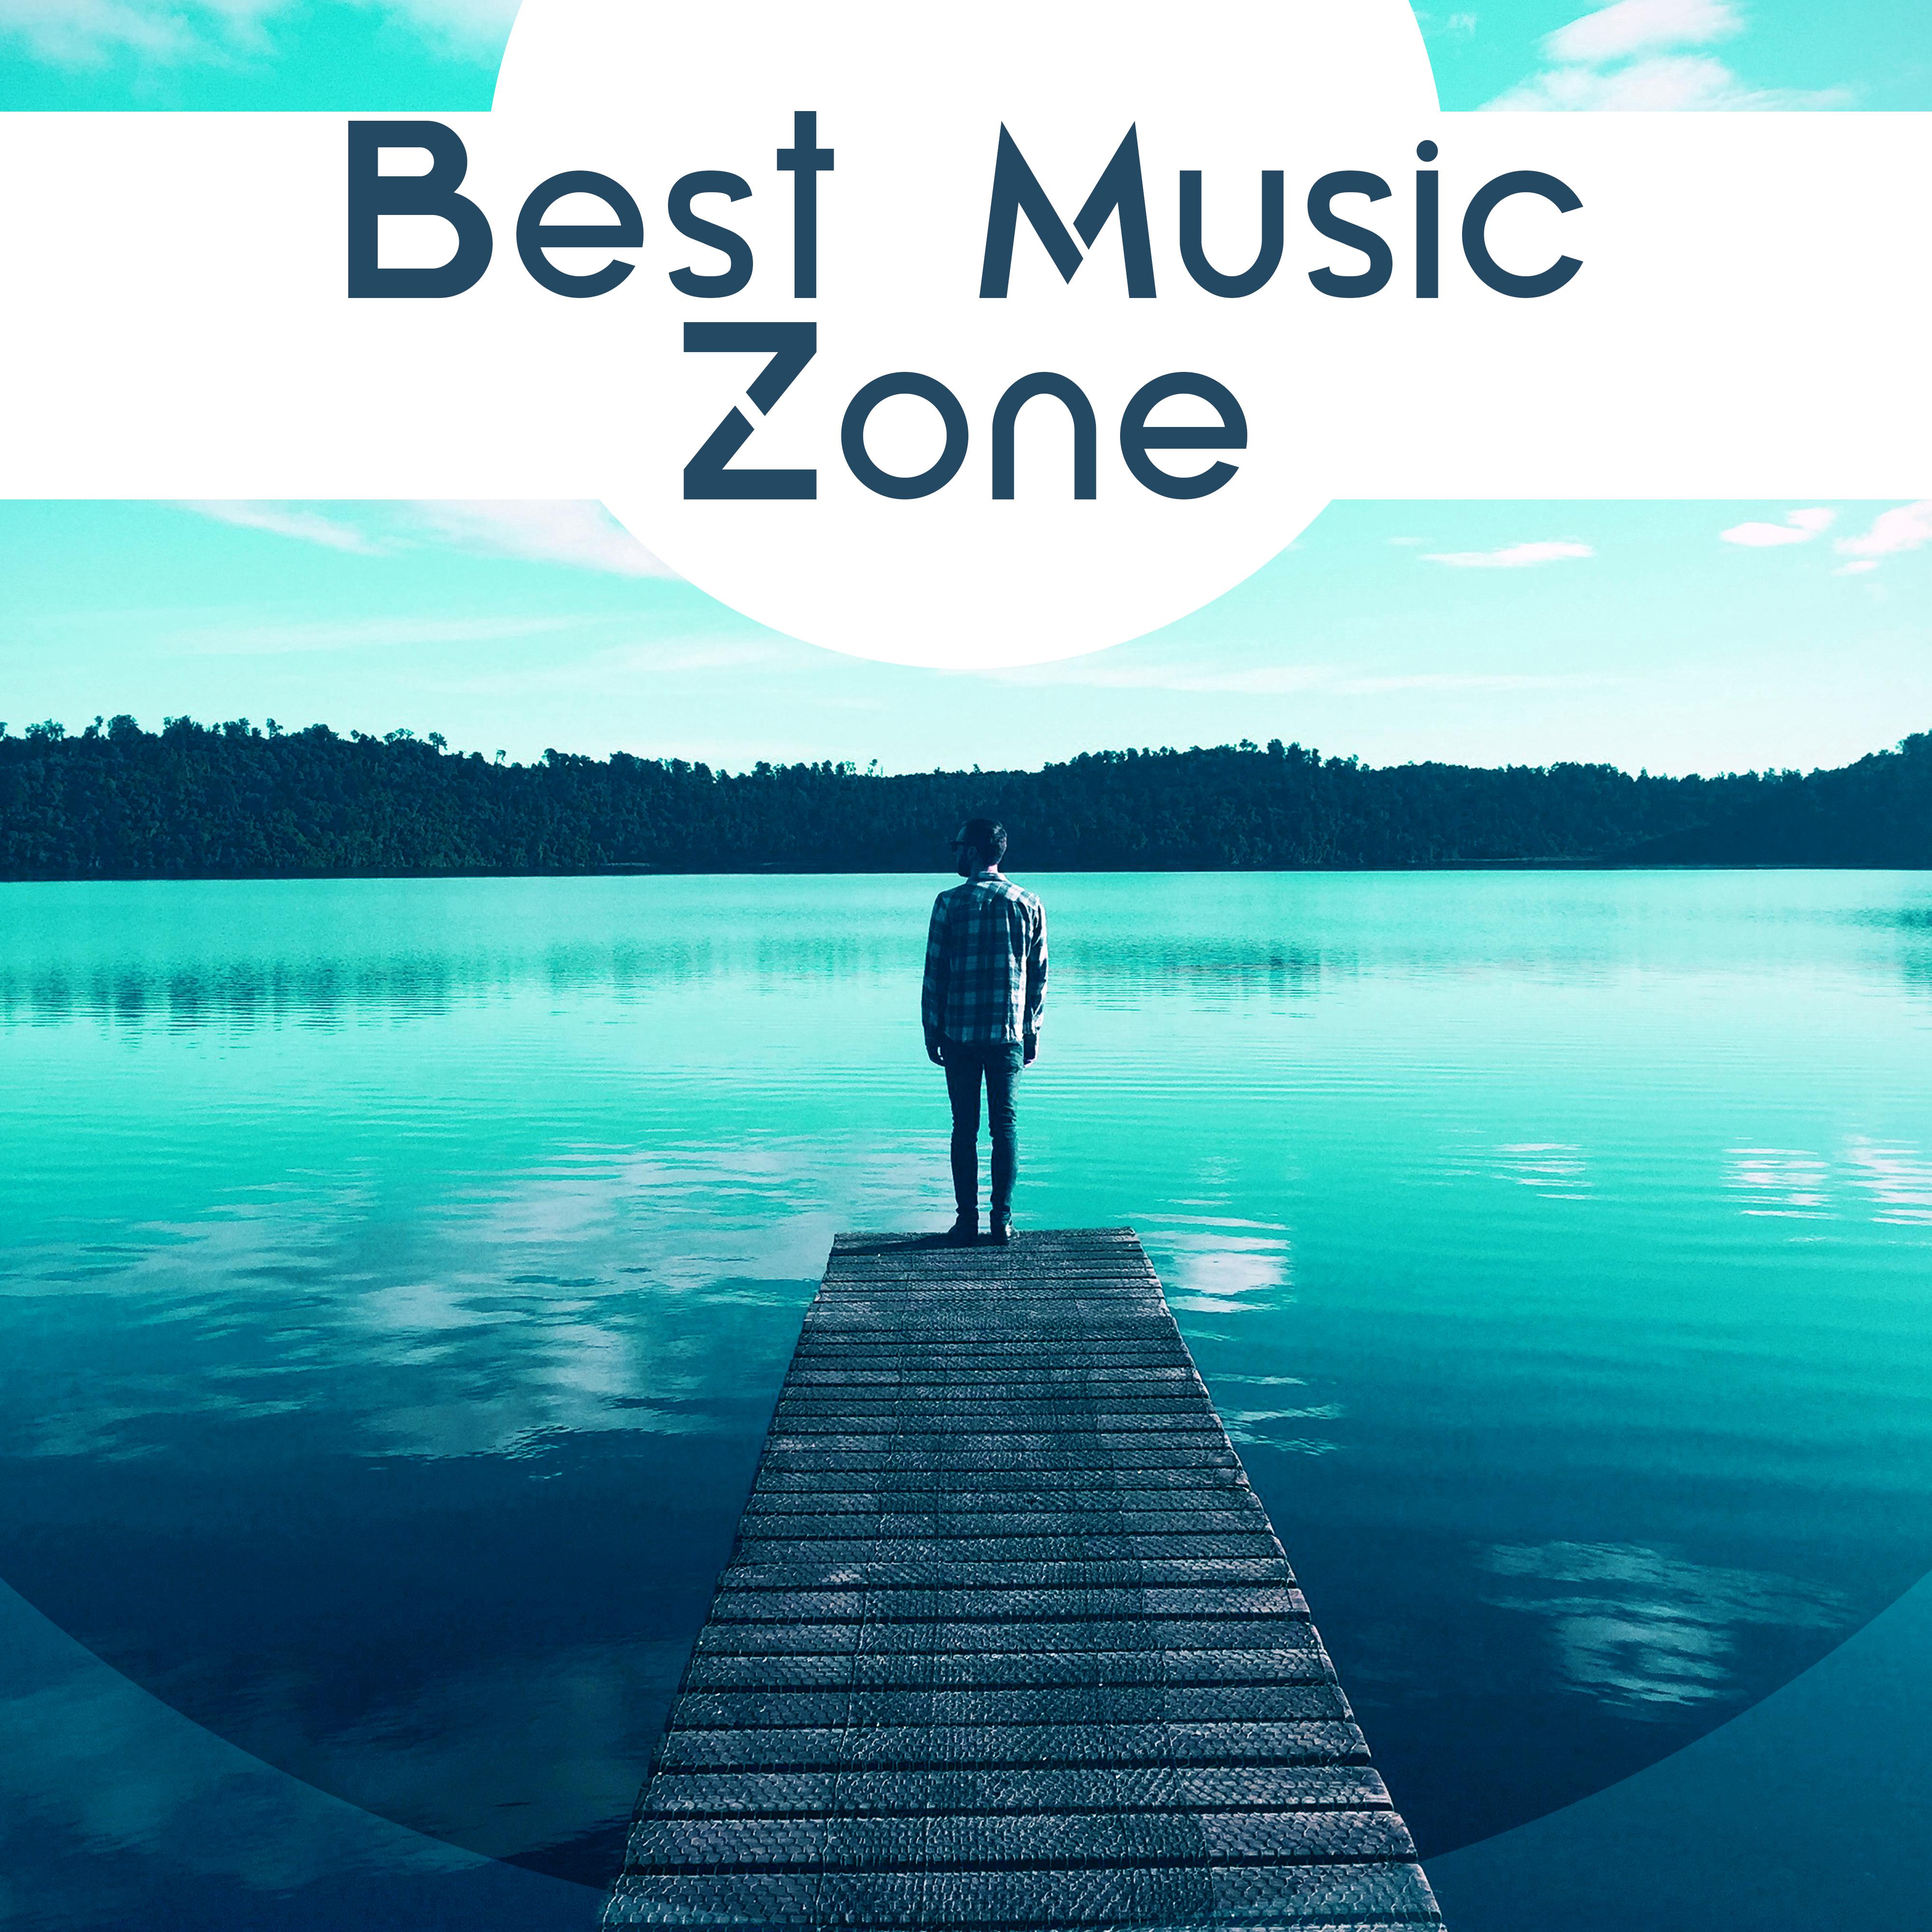 Best Music Zone - Oasis of Summer, Resting on the Beach, Pleasant Sun, Delicate Sea Breeze